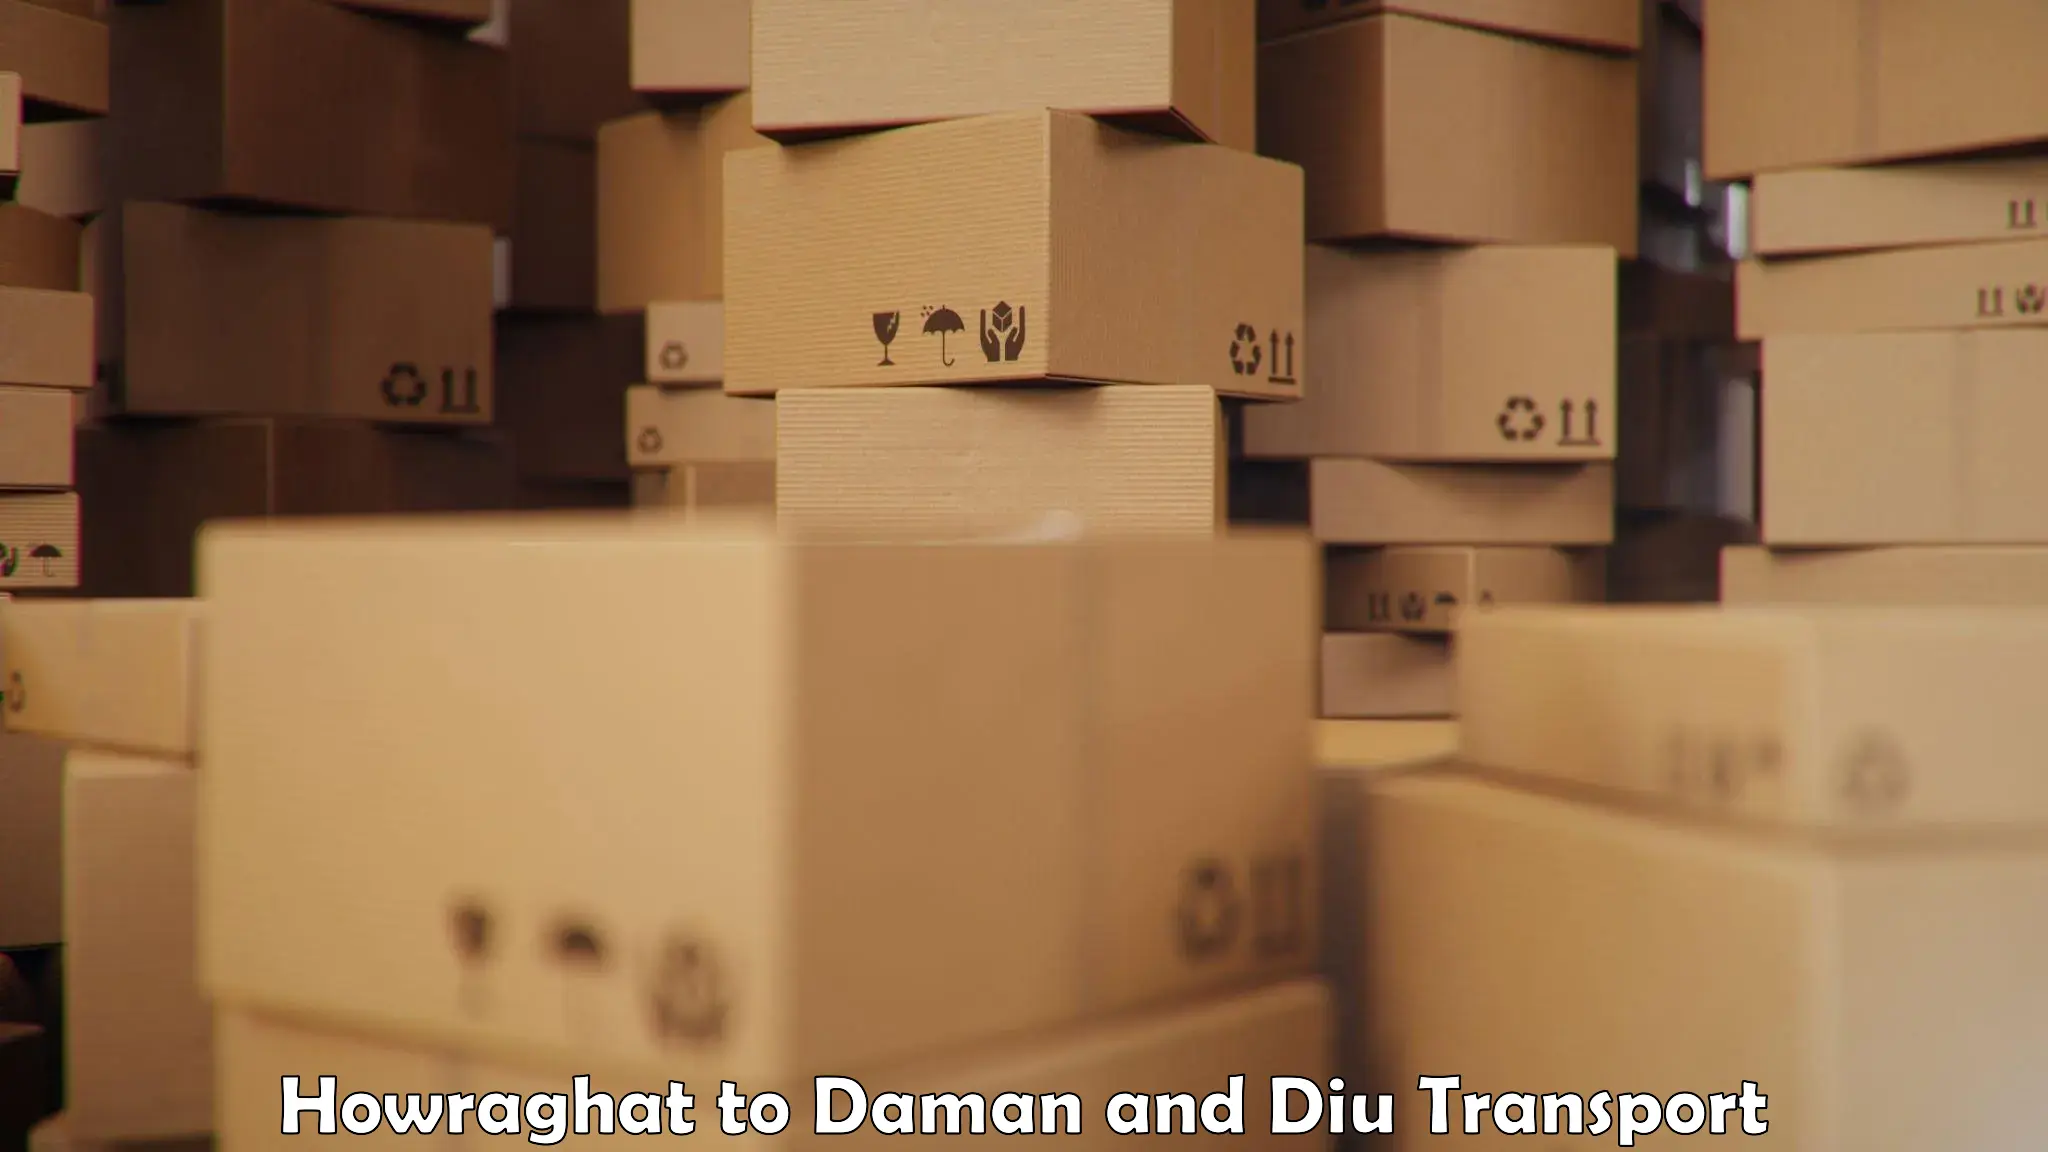 Domestic goods transportation services Howraghat to Daman and Diu